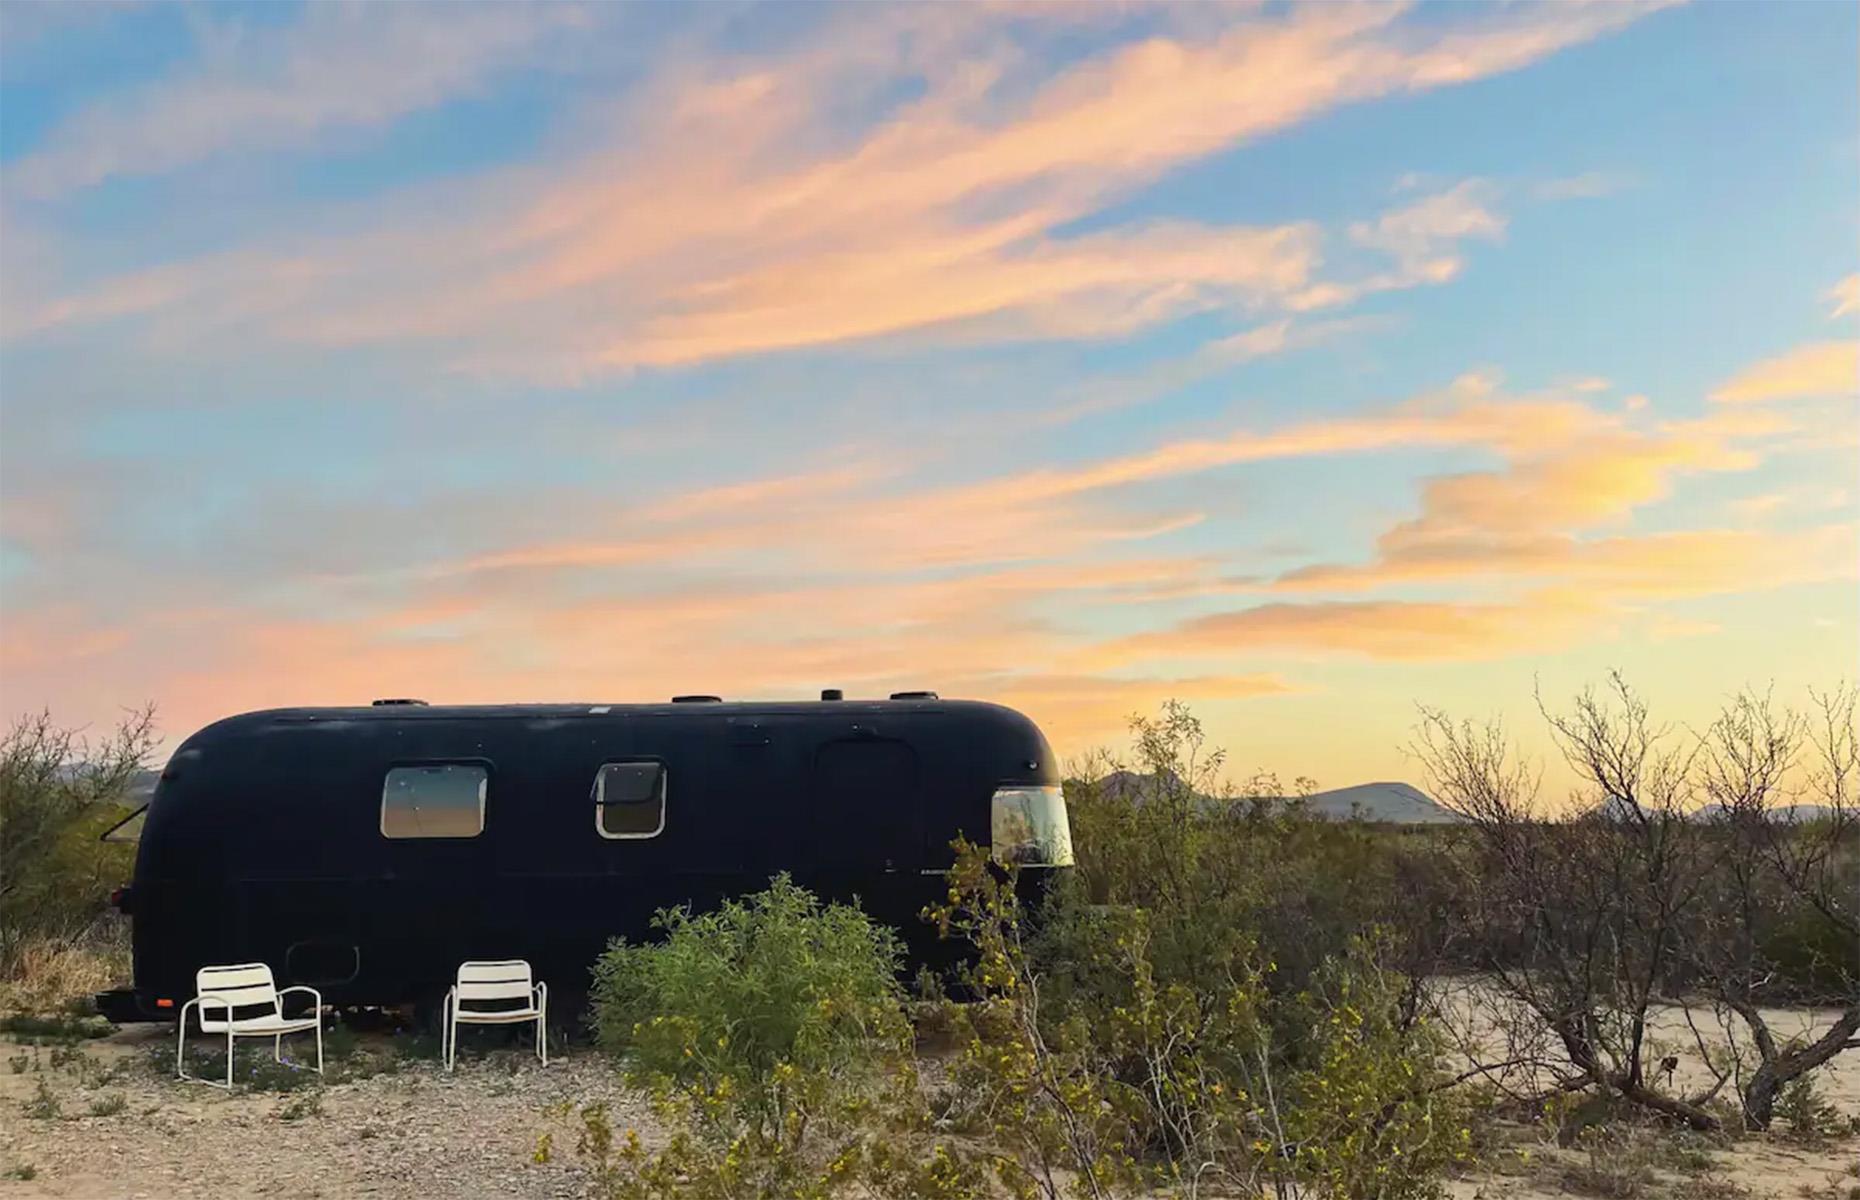 <p>This sleek black Airstream, located within Terlingua Ranch in Texas, has been dramatically remodeled for optimal comfort and style.</p>  <p>Black Moon, as the Airstream has been dubbed, has been designed to maximize the breathtaking desert landscape surrounding it, with a grilling area and firepit provided so you can enjoy a cookout under the stars.</p>